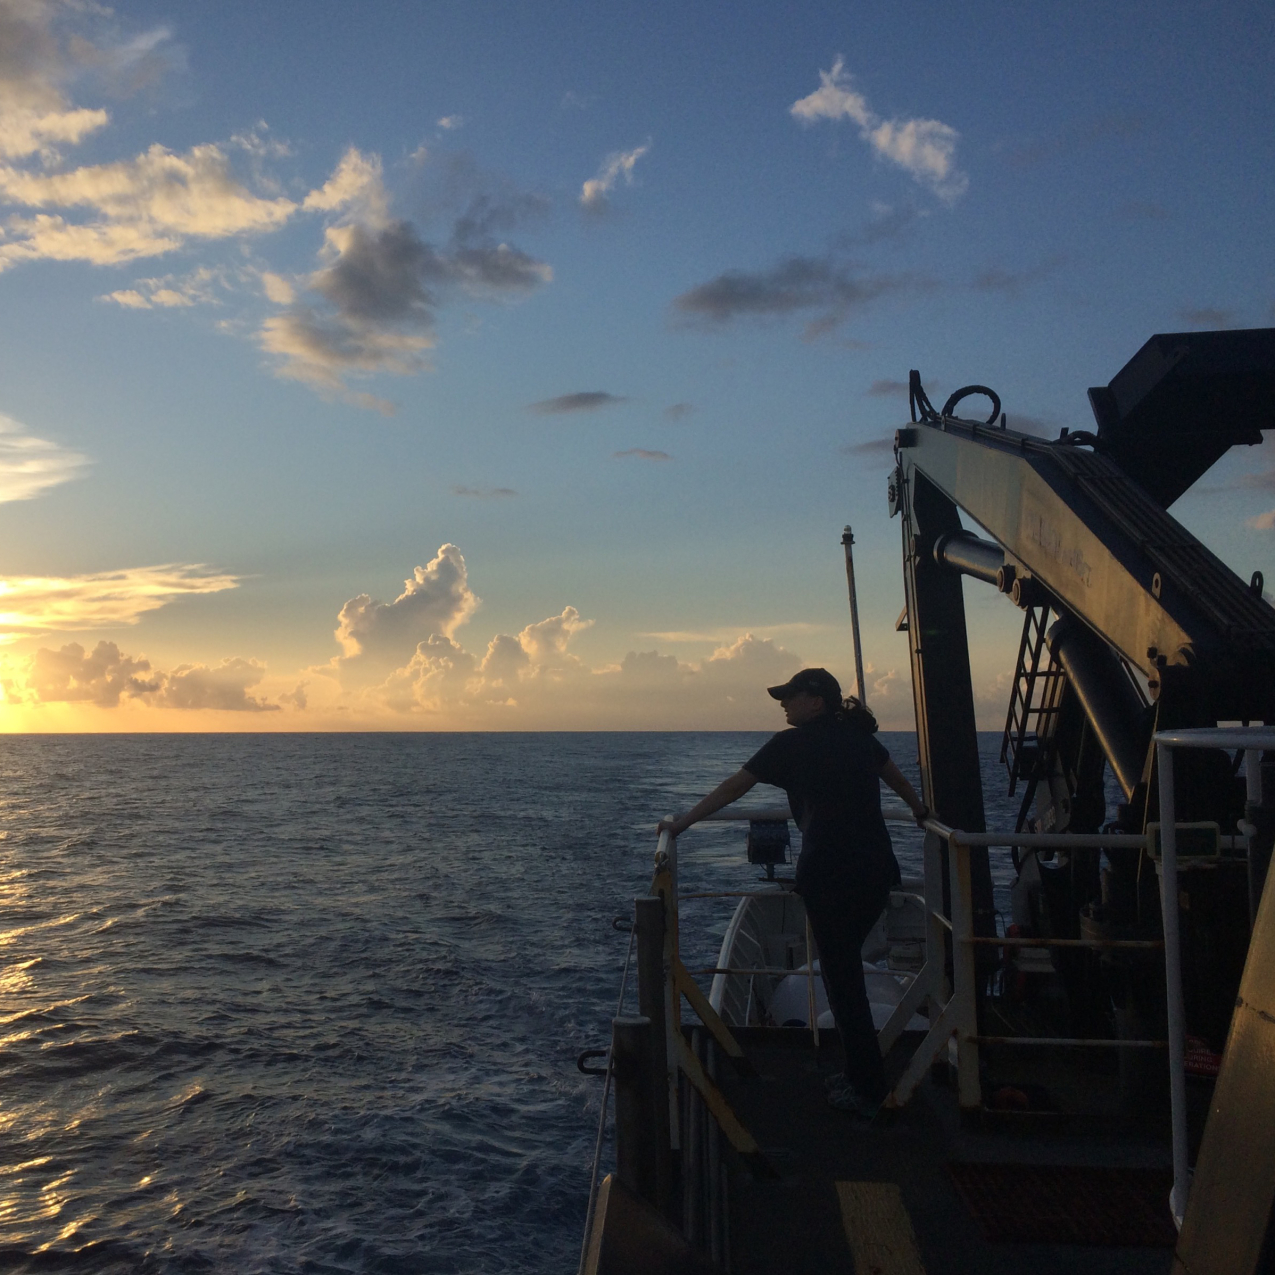 Emily Narrow, mission videographer, enjoys the sunset over the Pacific Ocean from the back deck of NOAA Ship Okeanos Explorer, during the NOAA Ocean Exploration mission: Discovering the Deep: Exploring Remote Pacific Marine Protected Areas In 2017.